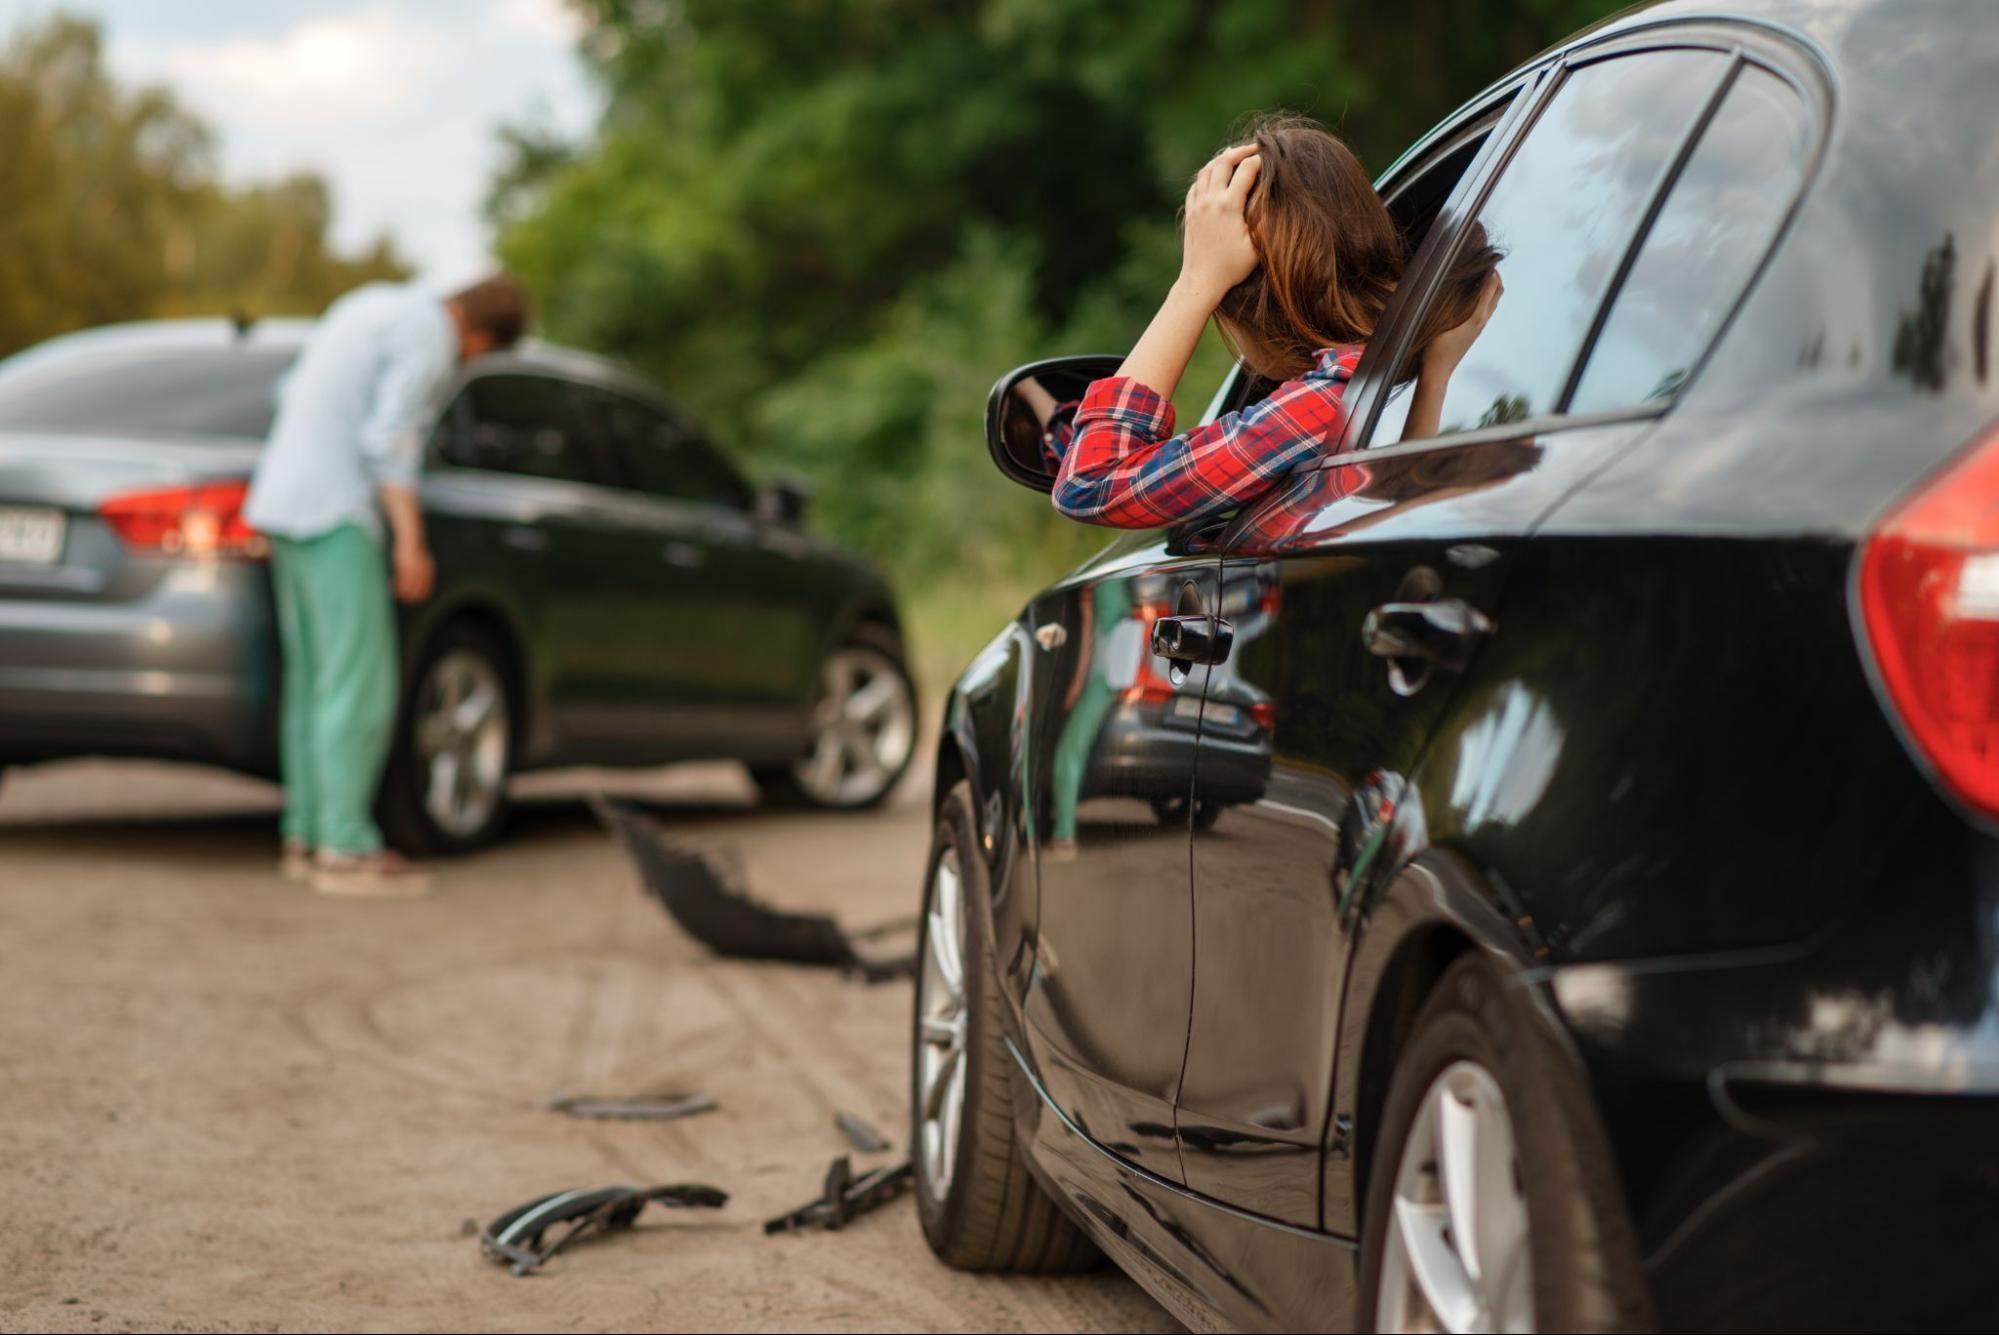 Do You Need to Go to Court after a Car Accident?